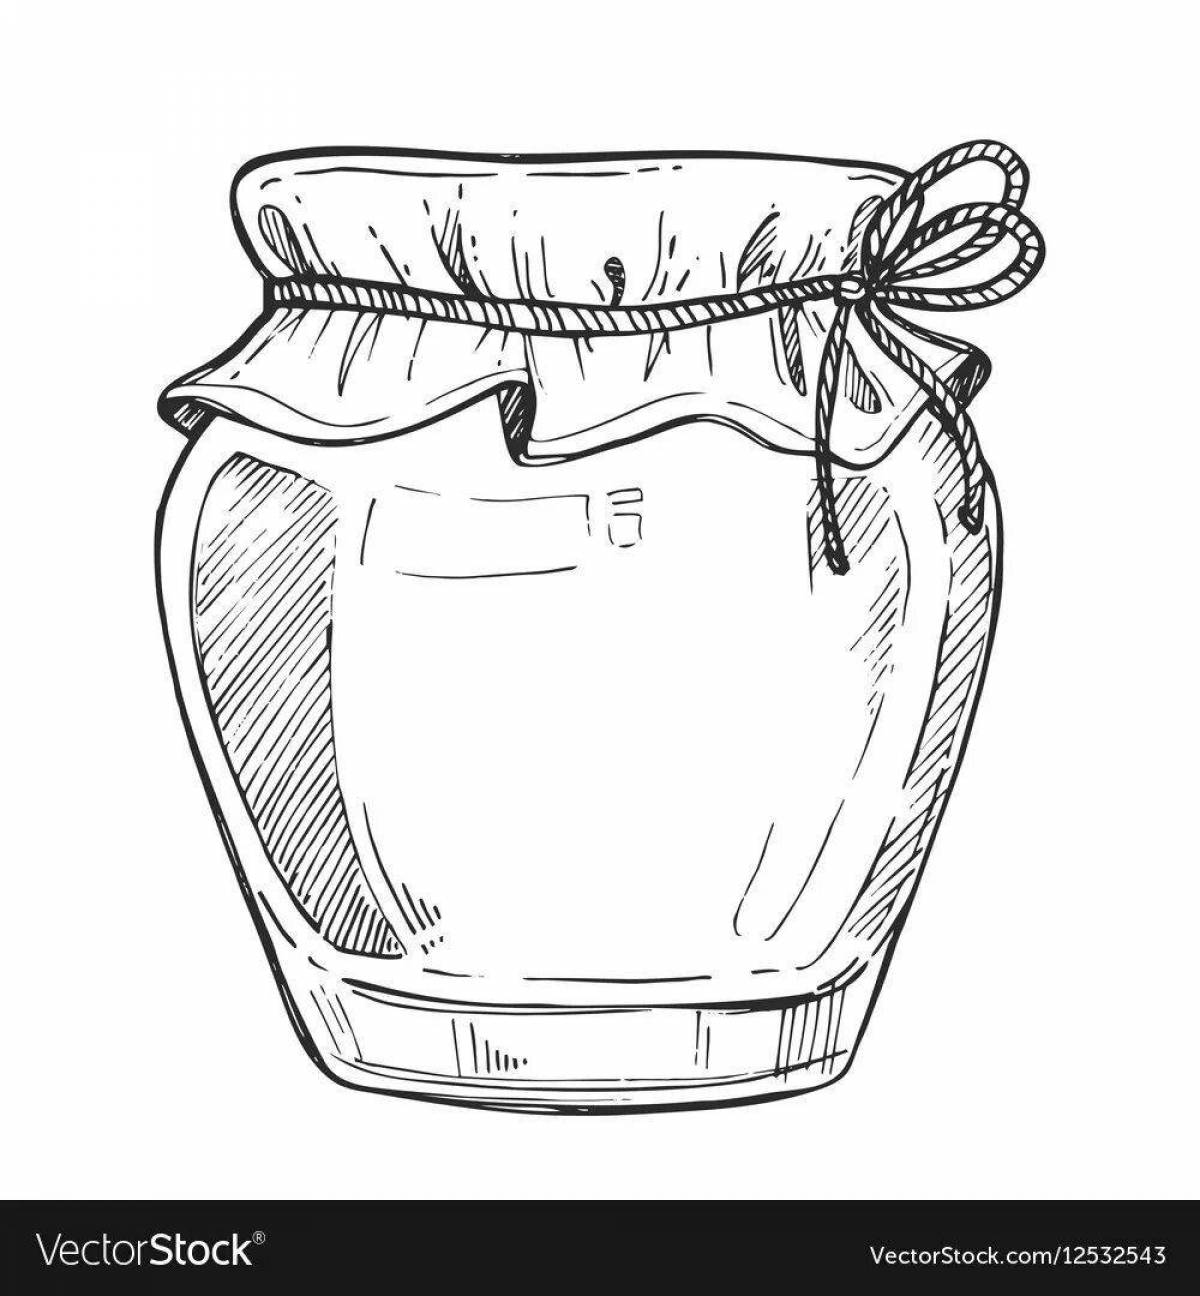 Coloring page charming jar of jam